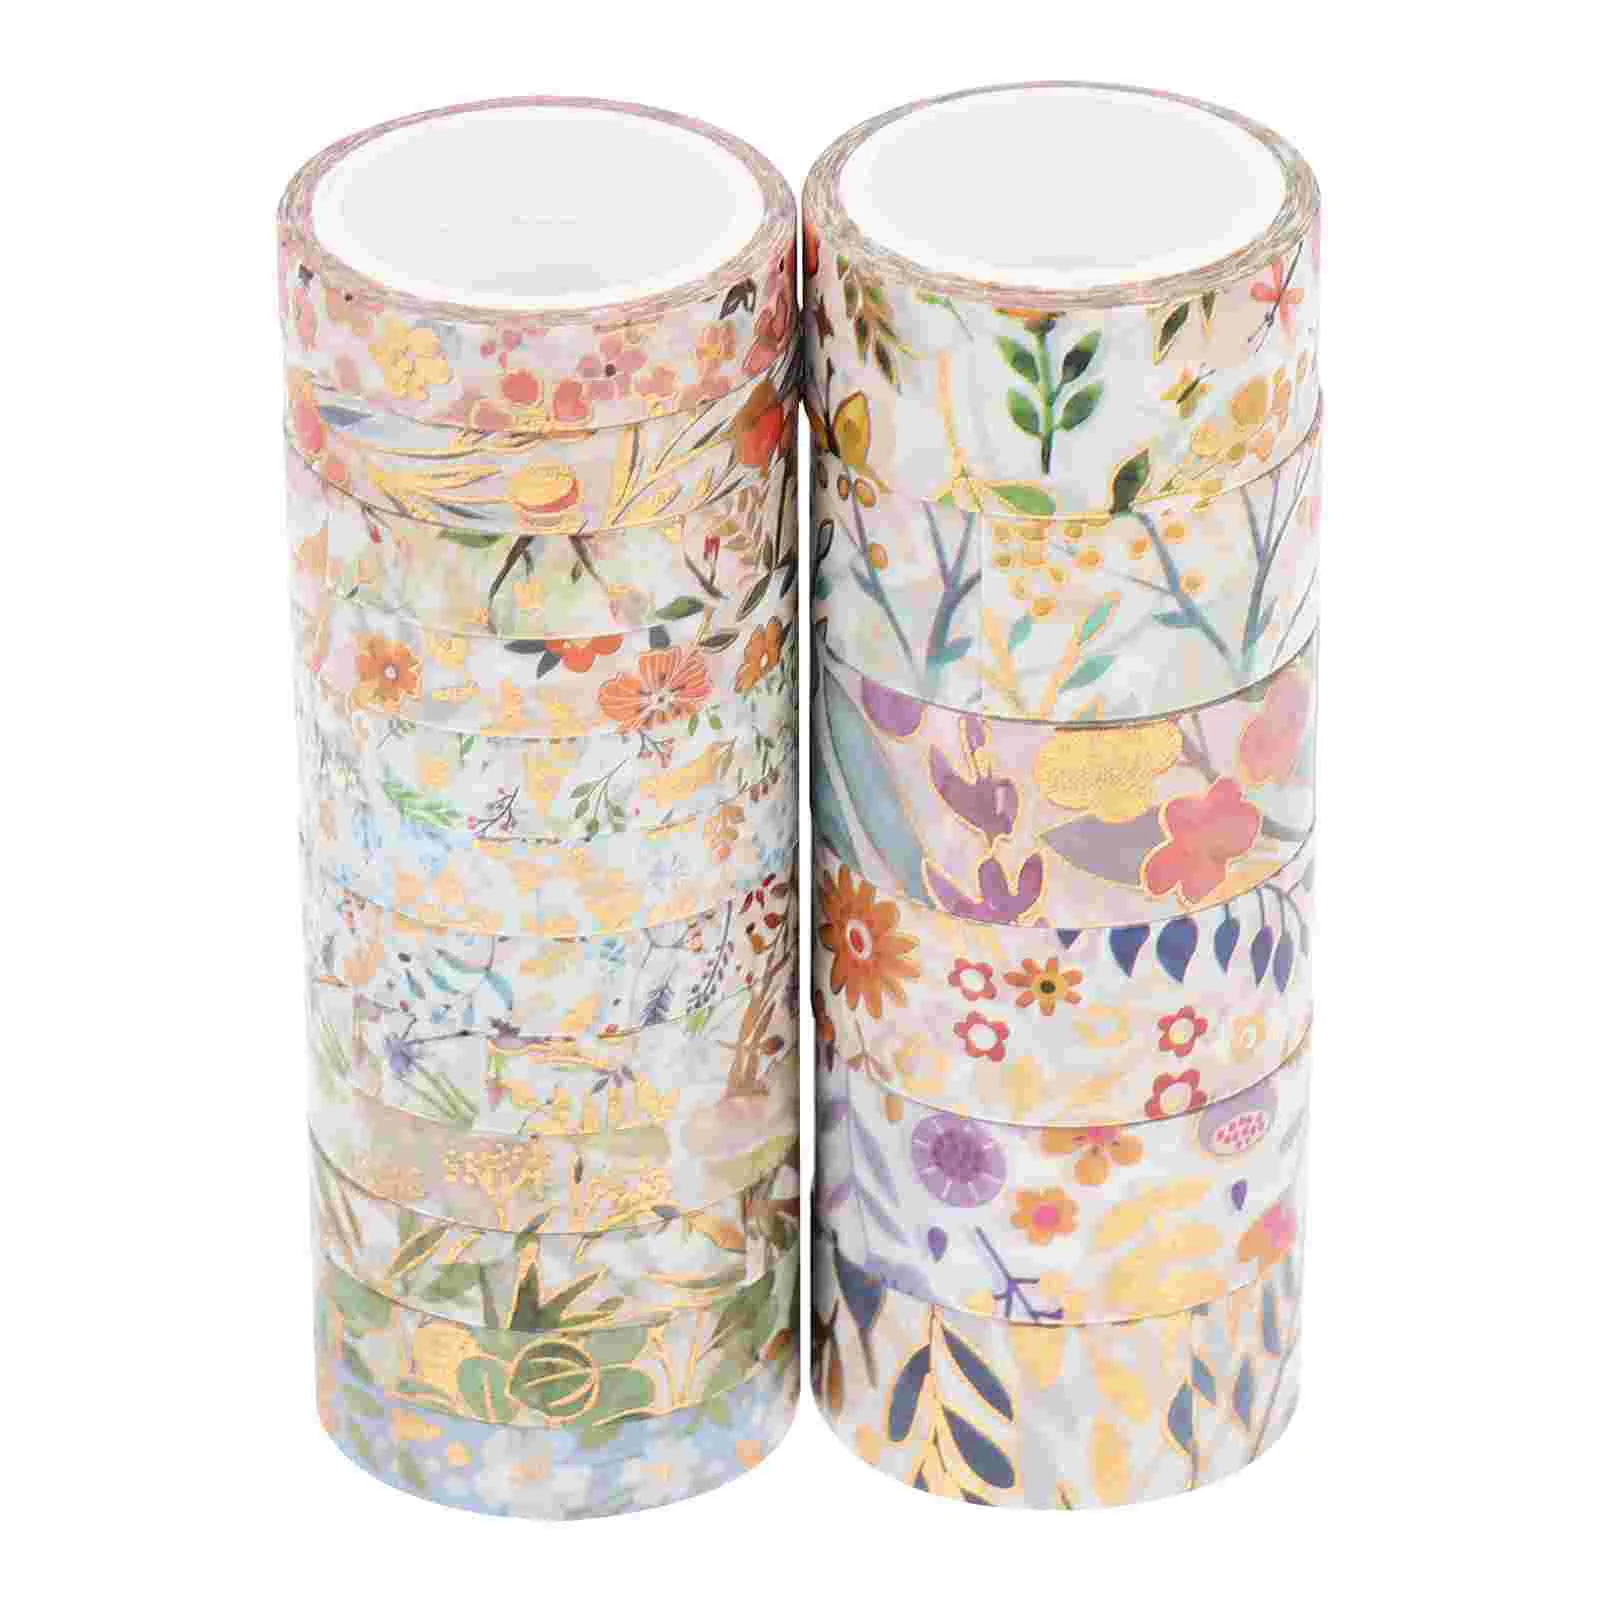 

18 Rolls Washi Tape Wrapping Diary Weather Sealing Adhesive Planners Bird Floral Masking Sticker Flowers